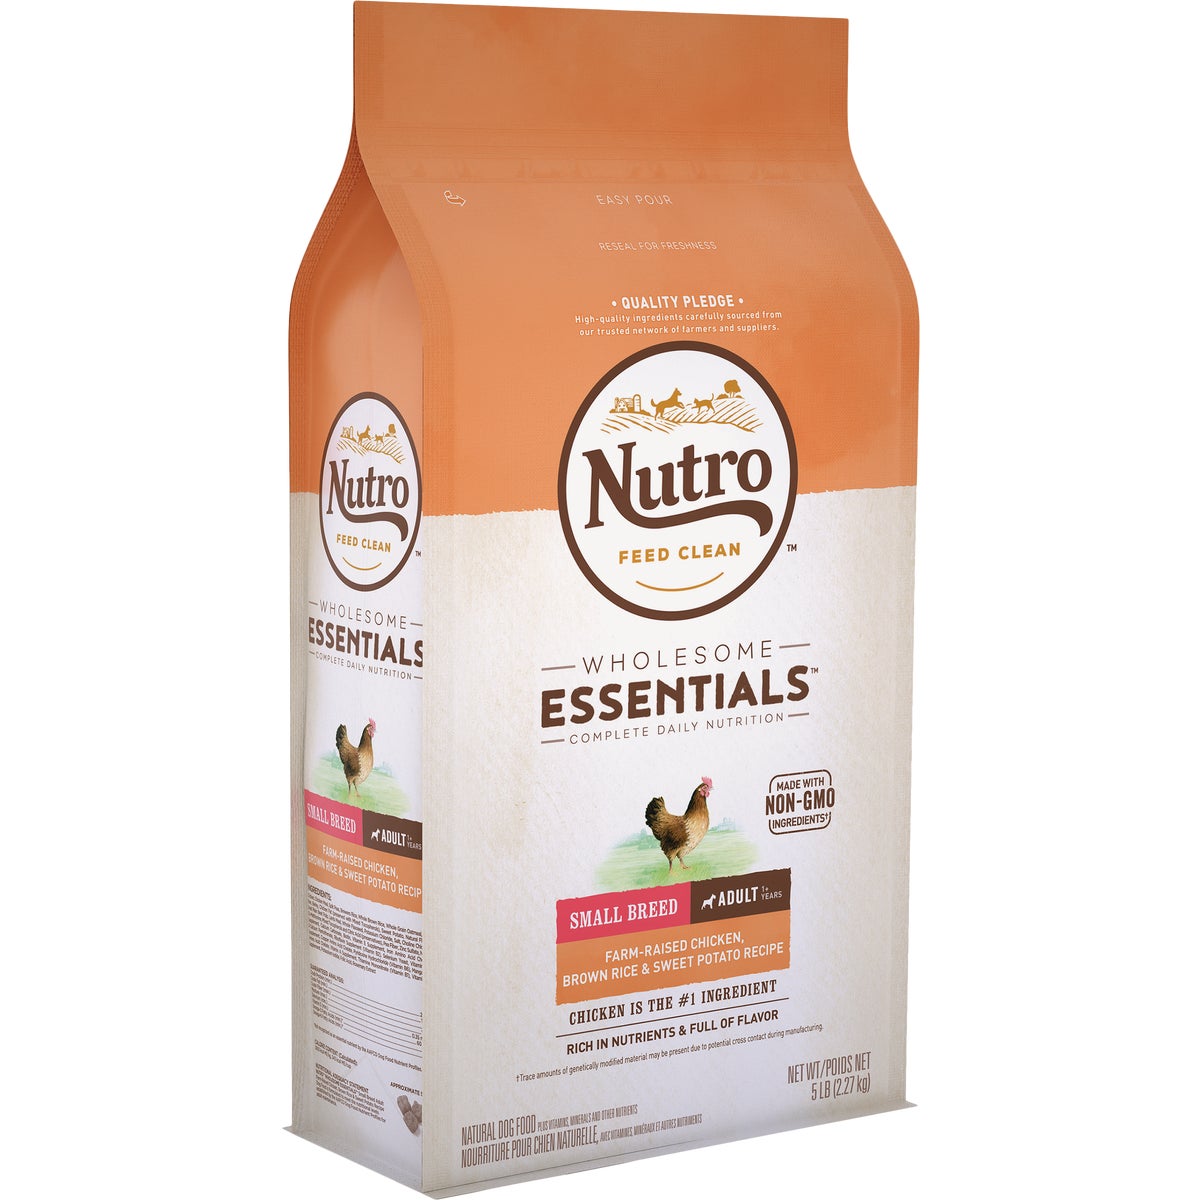 Nutro Wholesome Essentials 5 Lb. Chicken, Brown Rice, & Sweet Potato Small Breed Adult Dry Dog Food